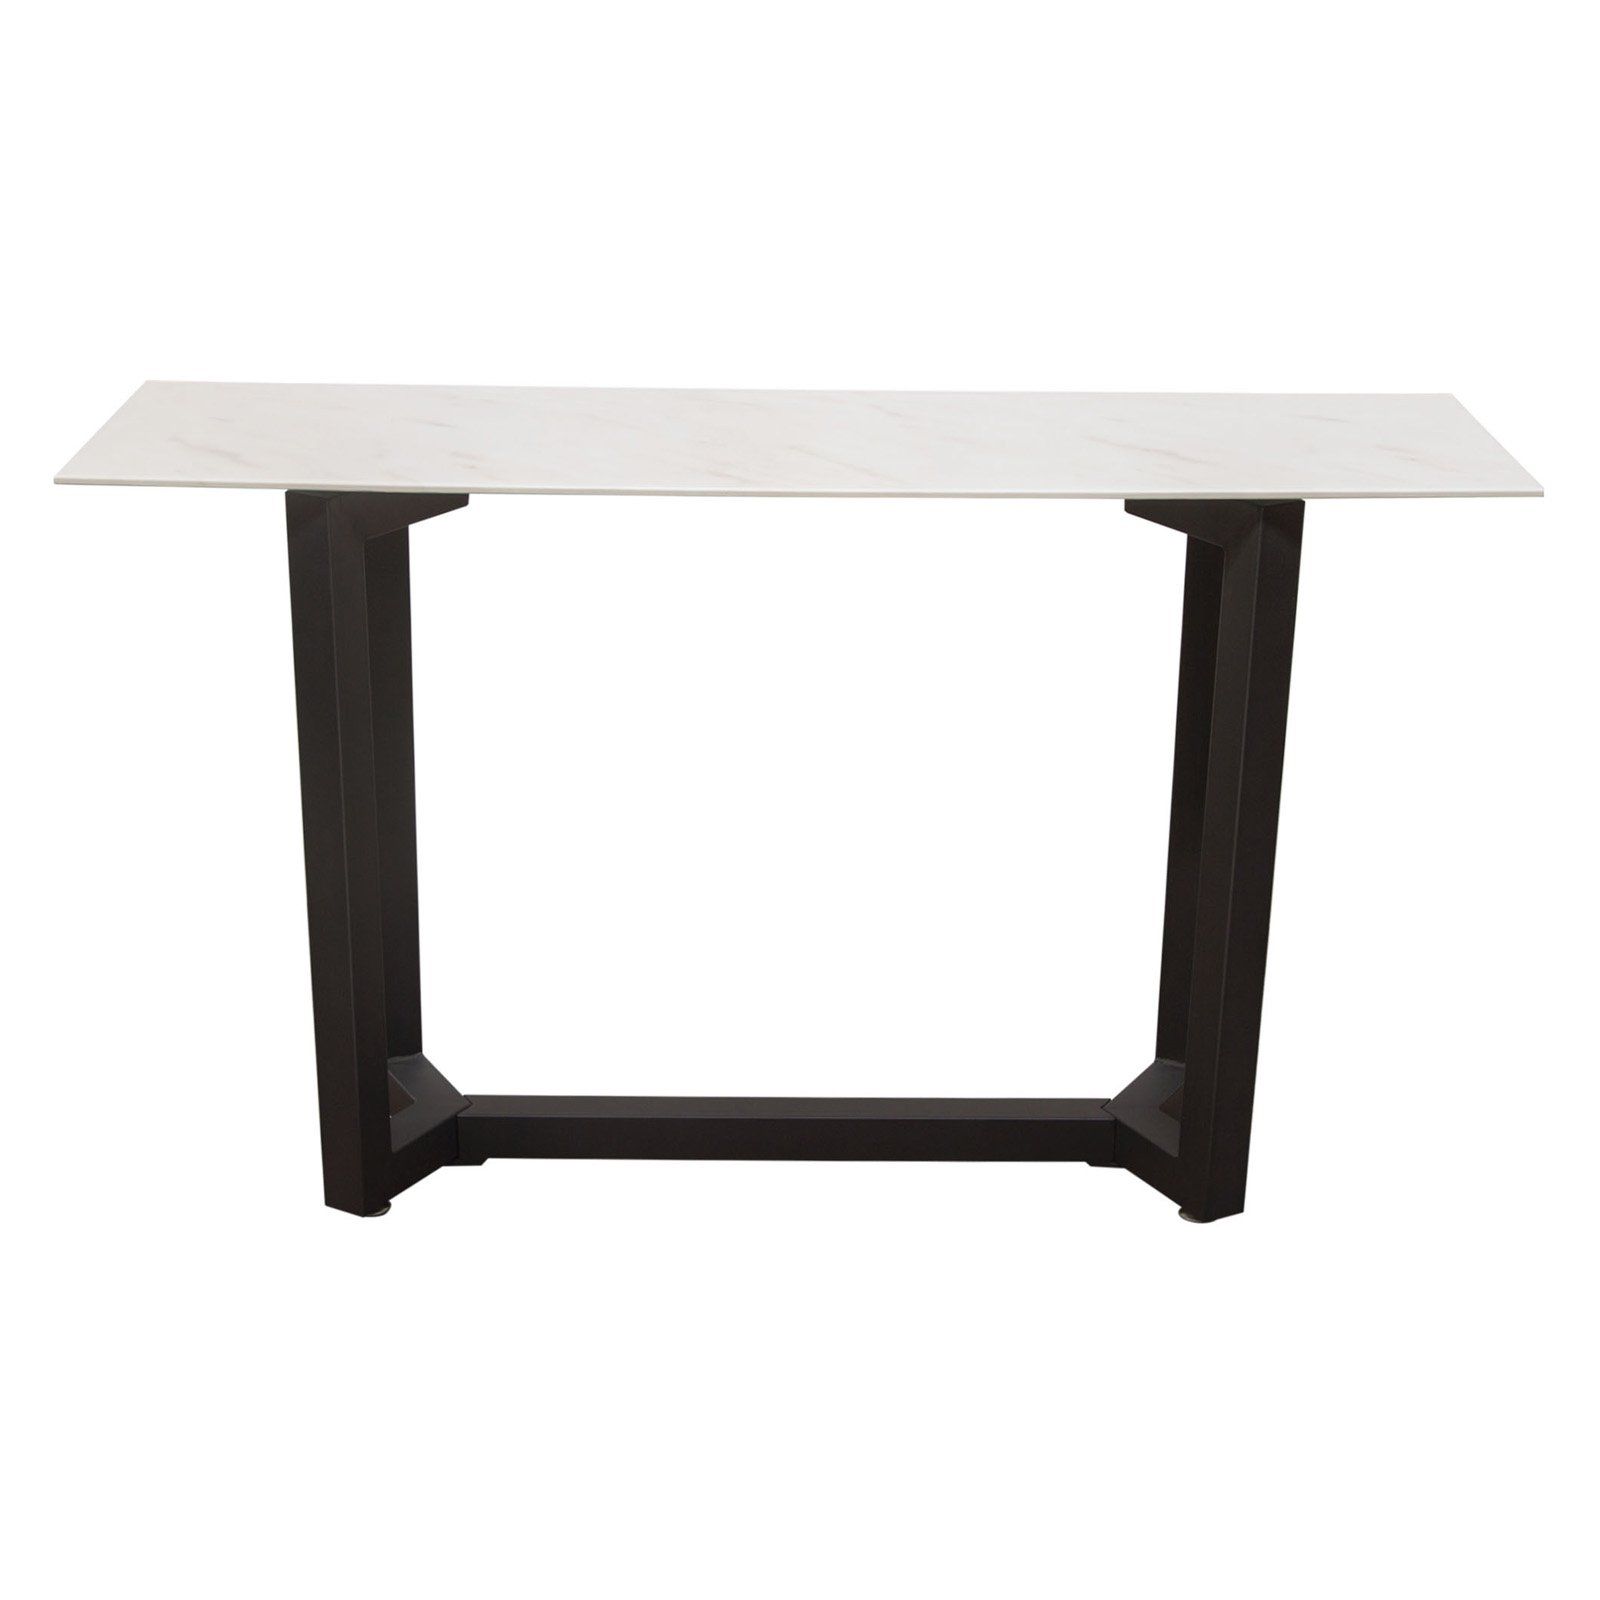 Preferred Rectangular Glass Top Console Tables Throughout Diamond Sofa Caplan Rectangular Console Table With Ceramic (View 4 of 10)